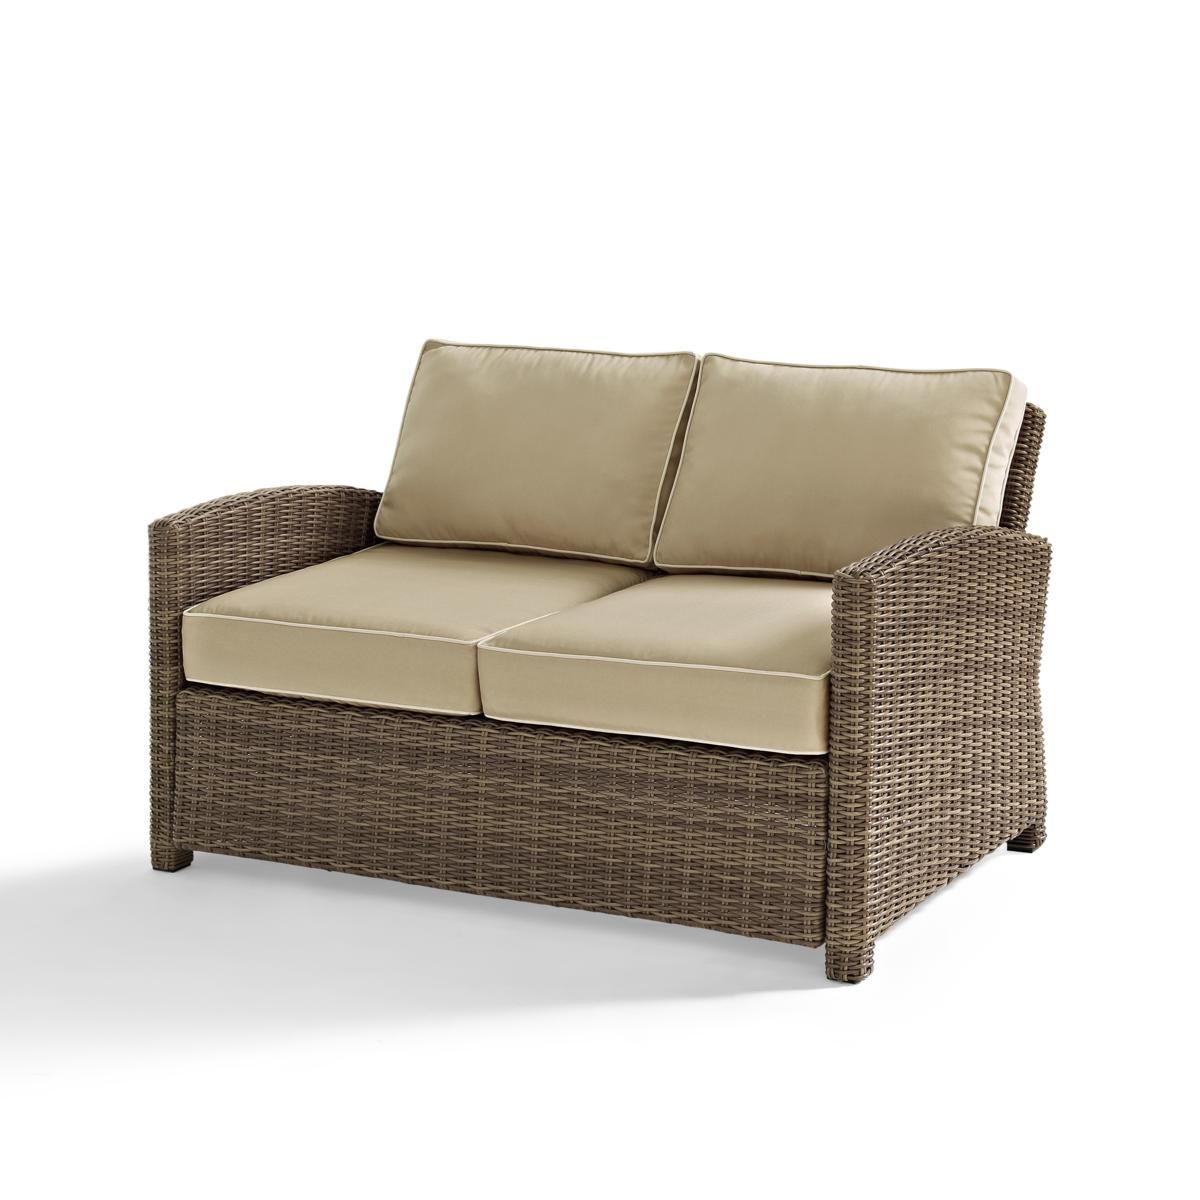 Outdoor Sand Cushions Loveseats Within 2017 Crosley Bradenton Outdoor Wicker Loveseat With Sand Cushions (Photo 14 of 15)